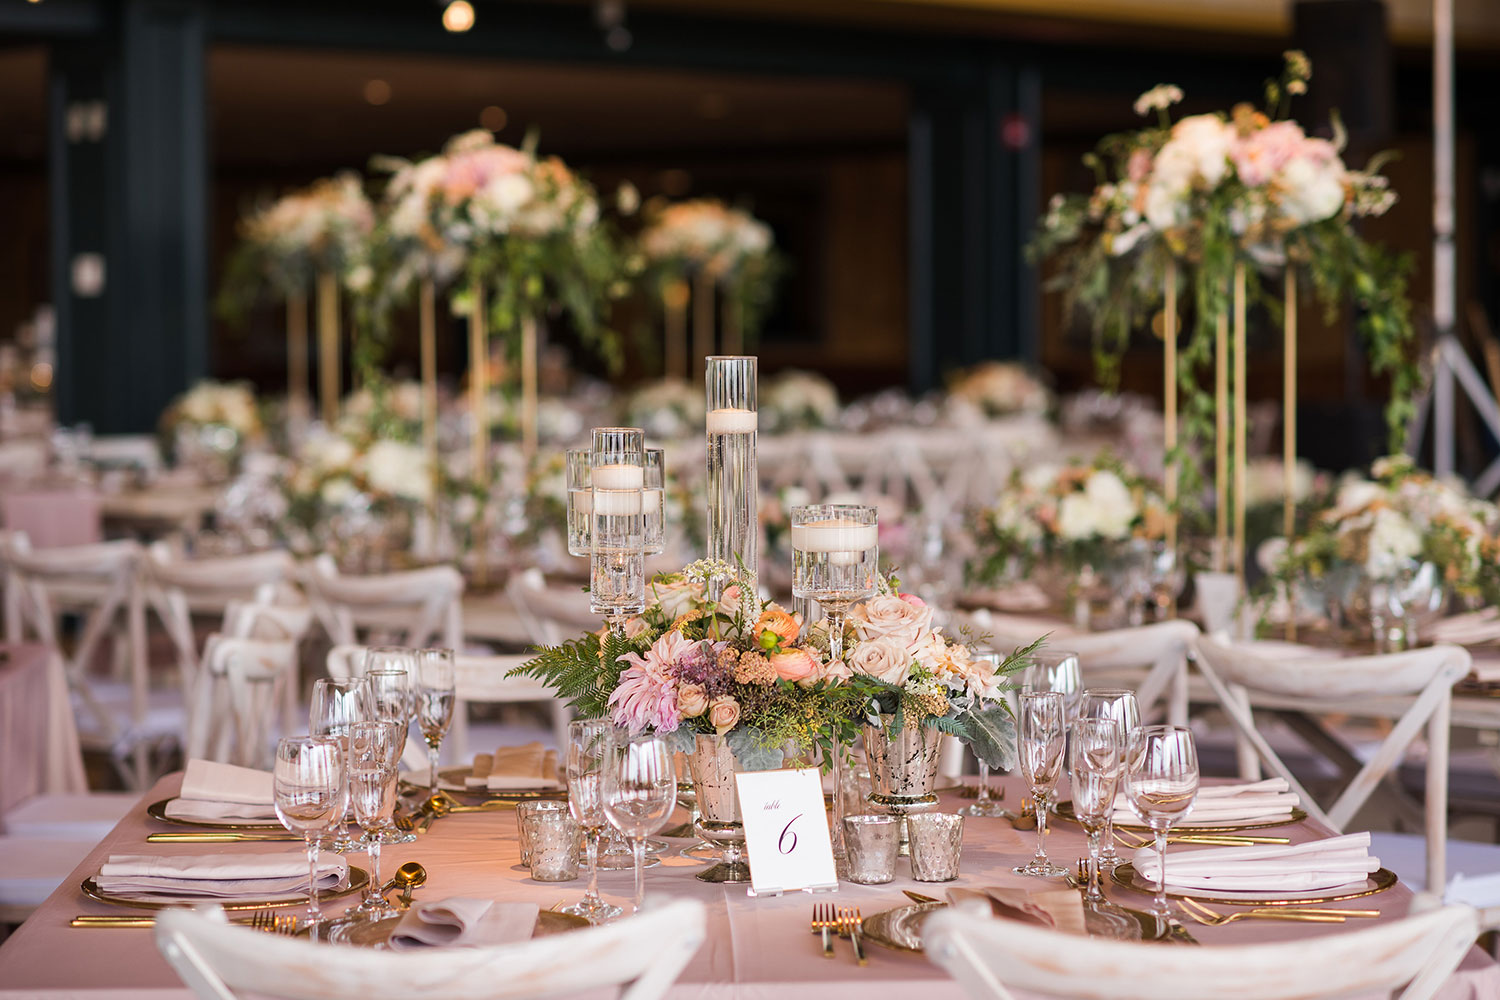 How a wedding planner can help.